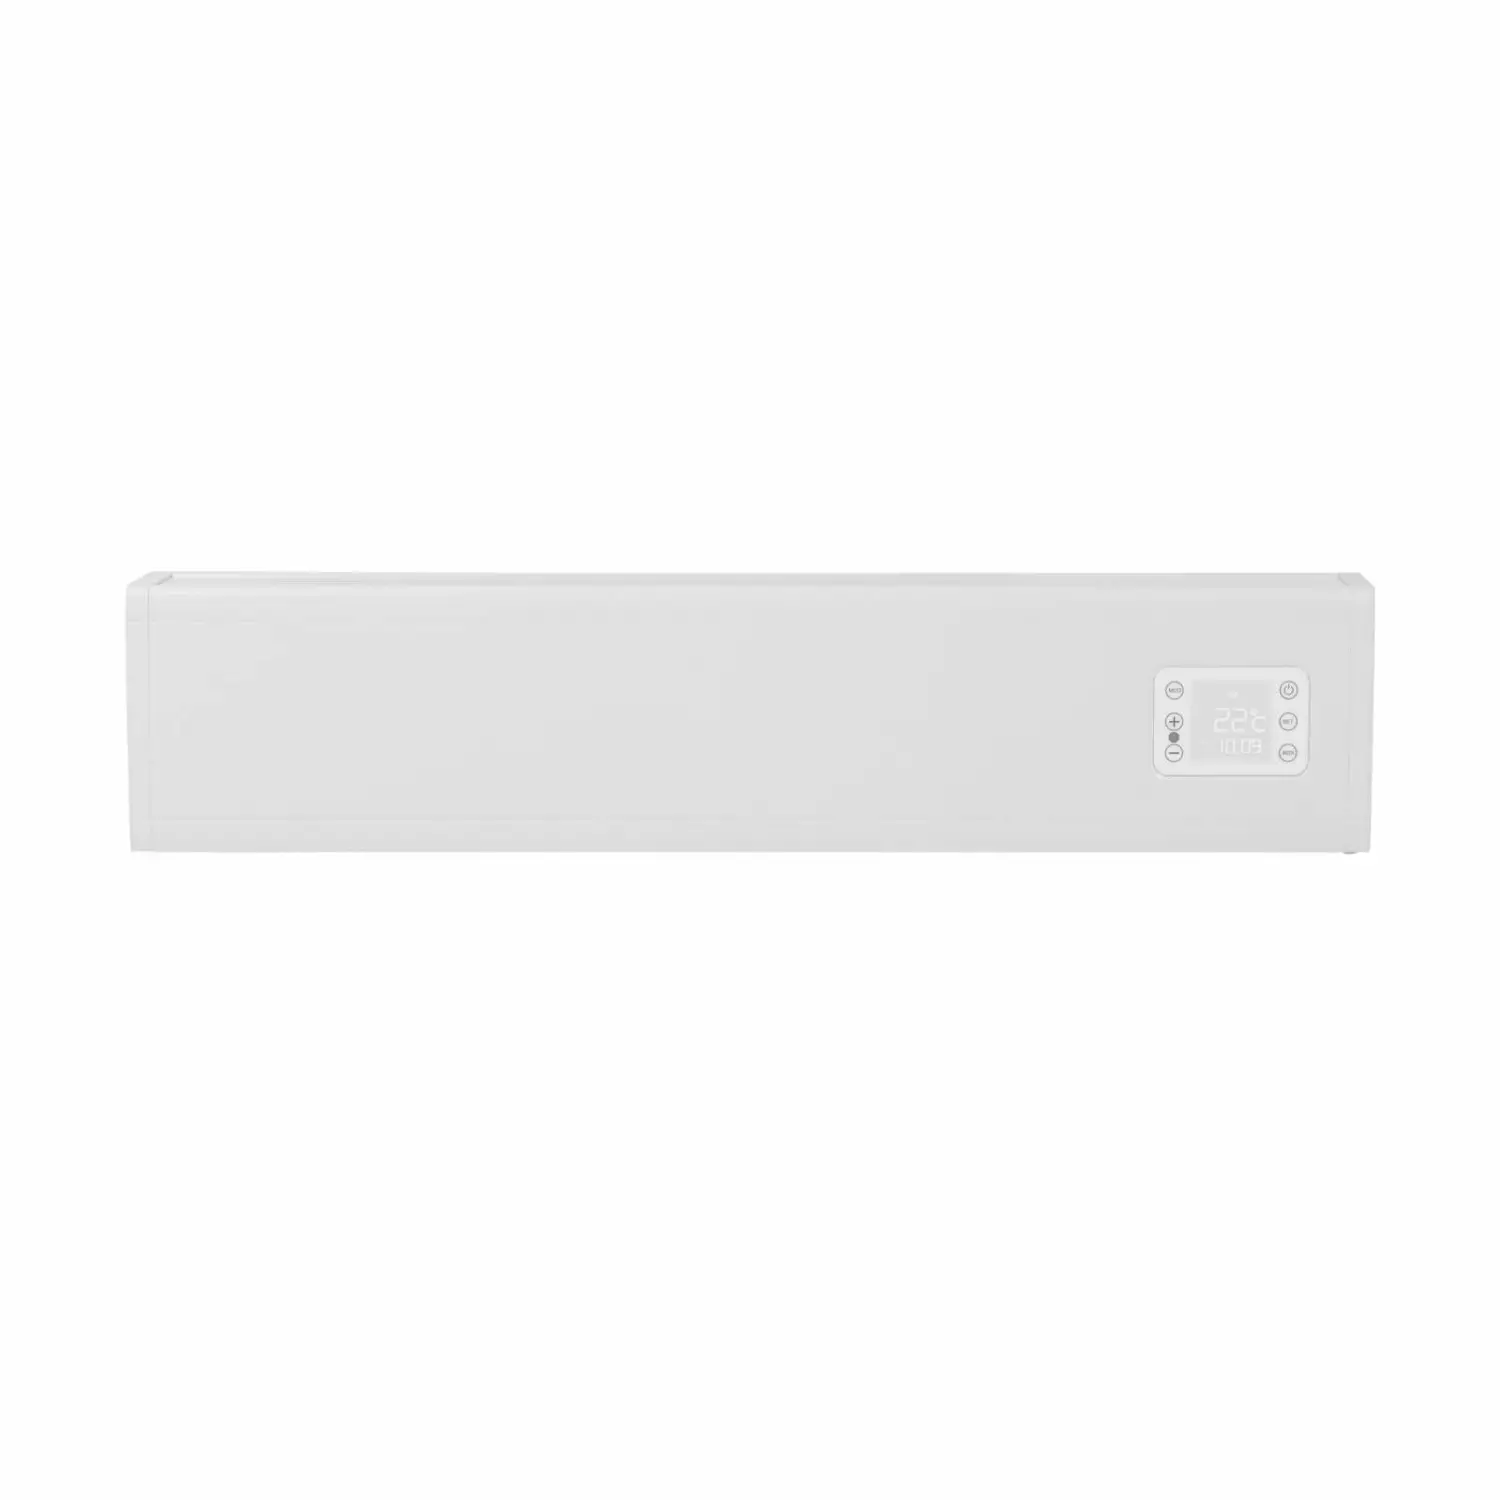 Eurom Alutherm Baseboard 1000 Wi-Fi White Convectorkachel - 1000W - 40m3-image